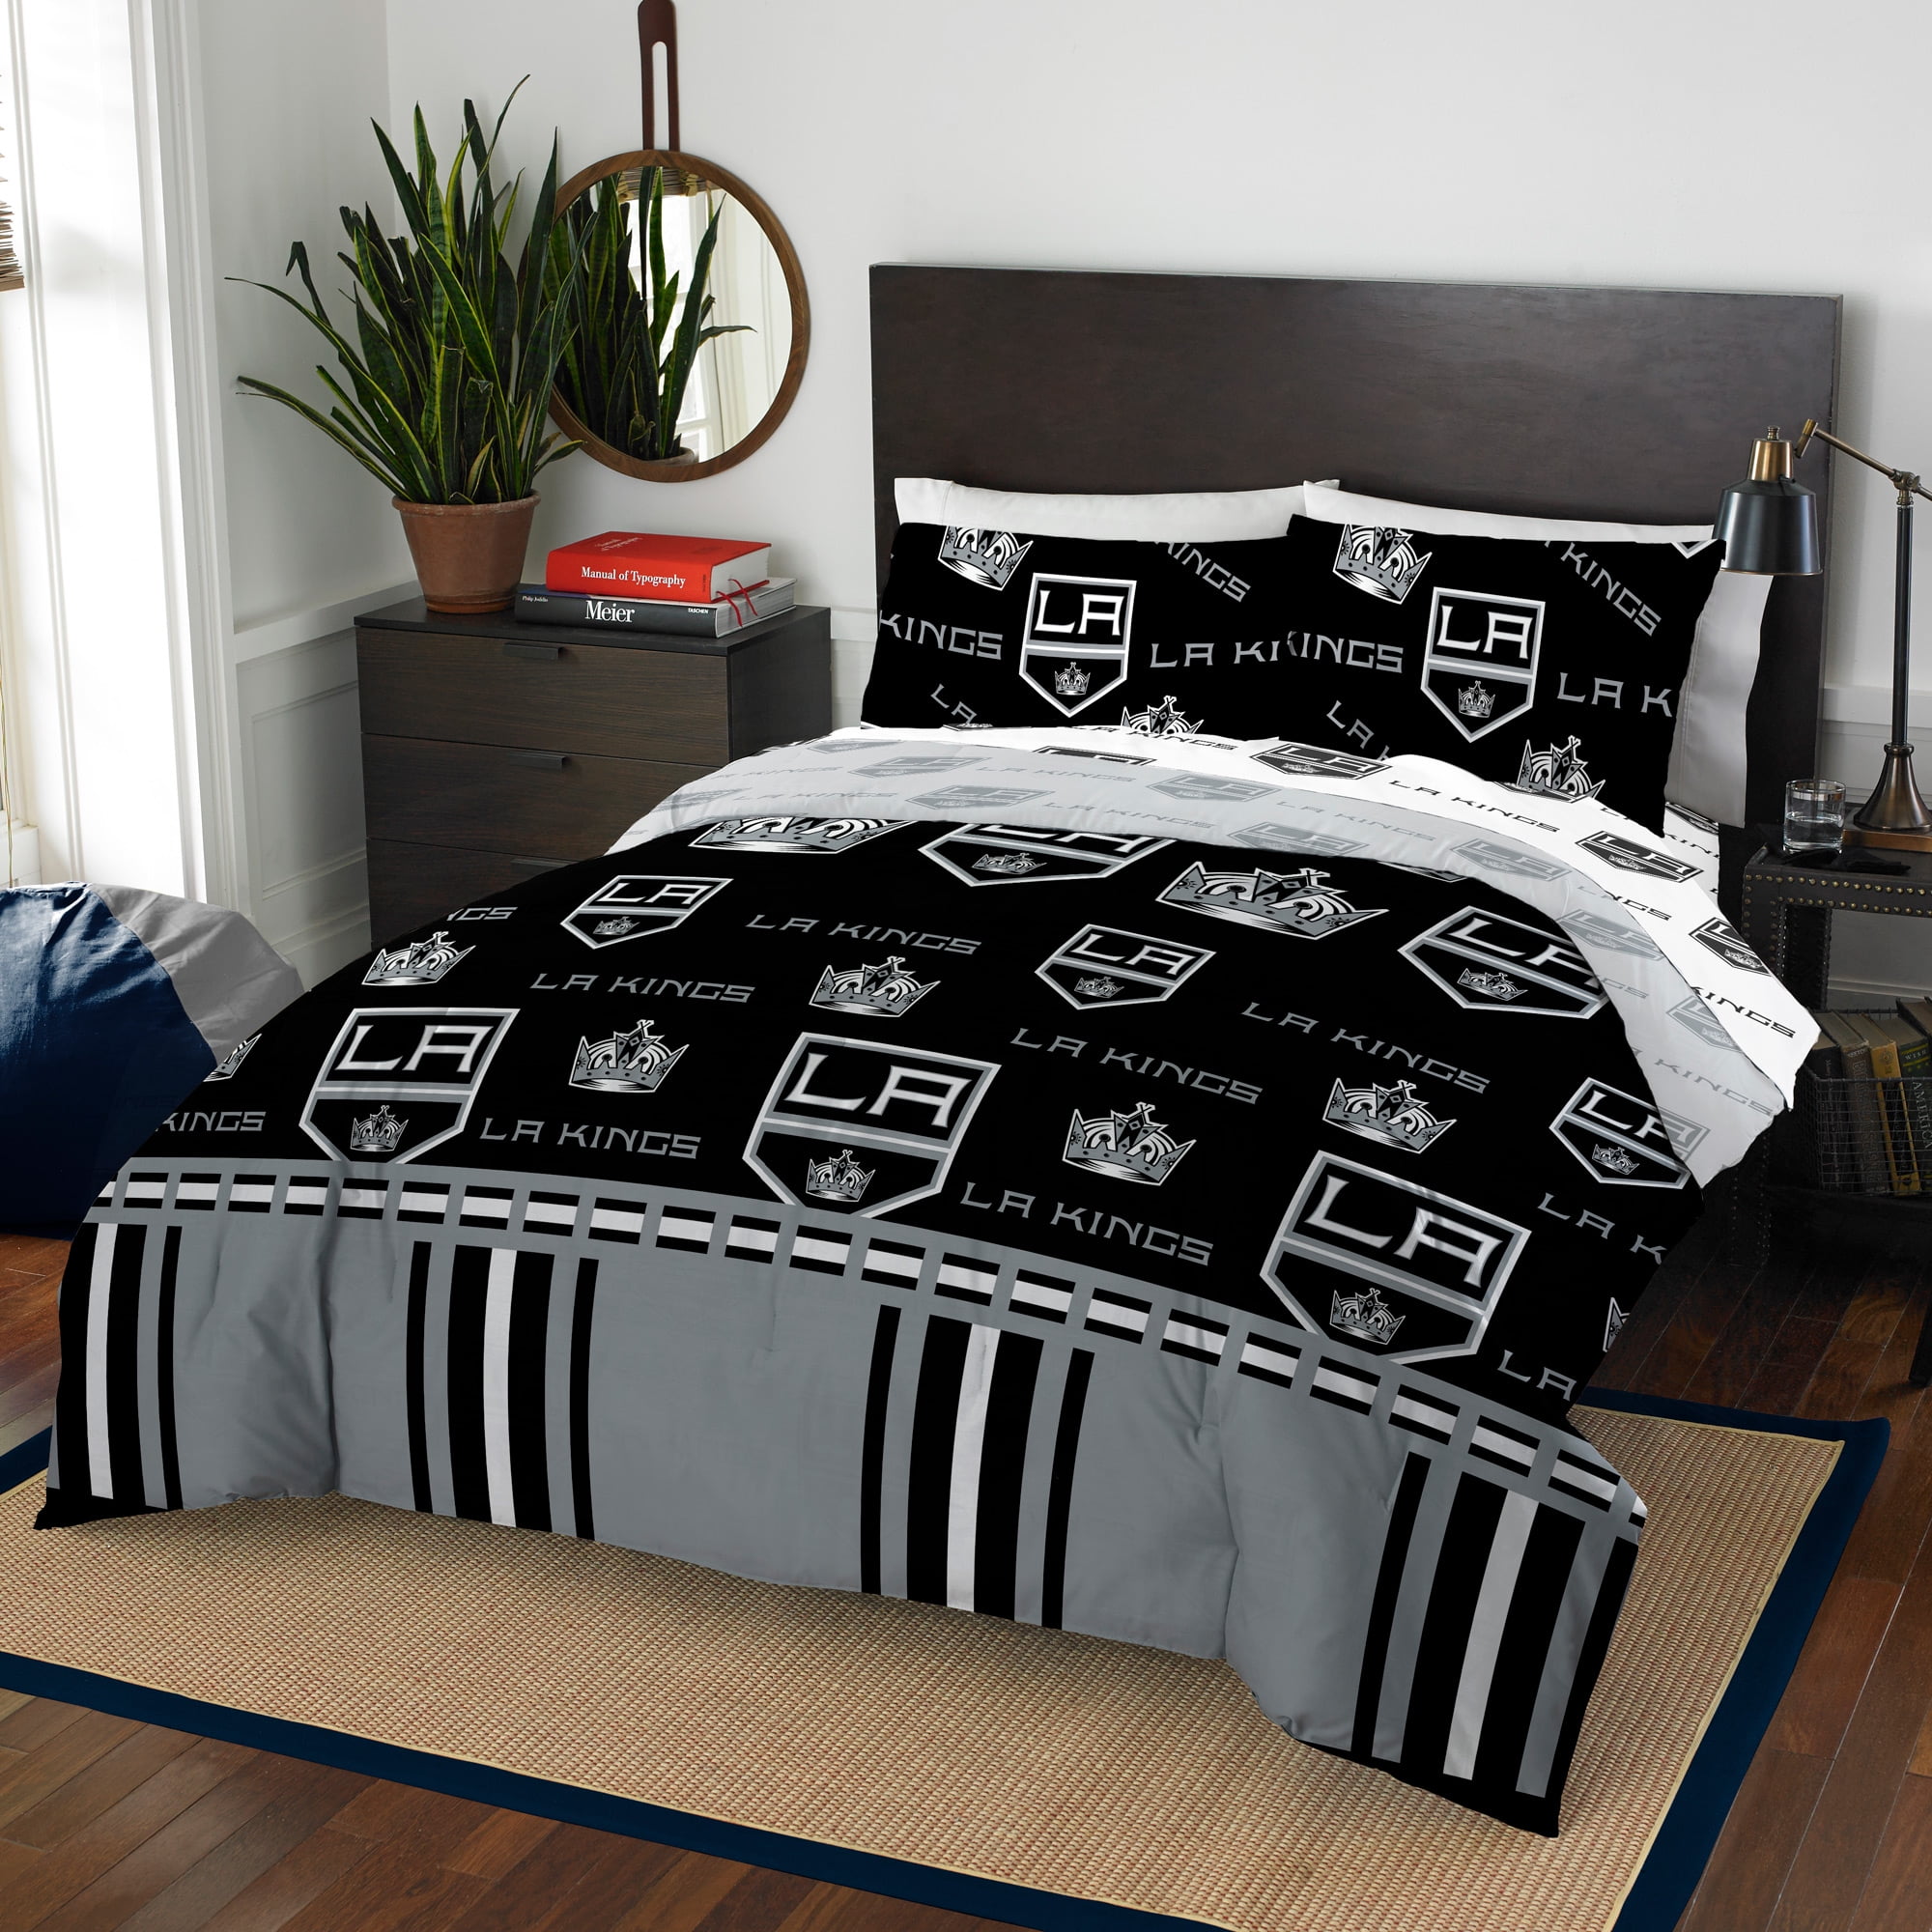 NHL Los Angeles Kings Bed In Bag Set, Queen Size, Team Colors, 100%  Polyester, 5 Piece Set 